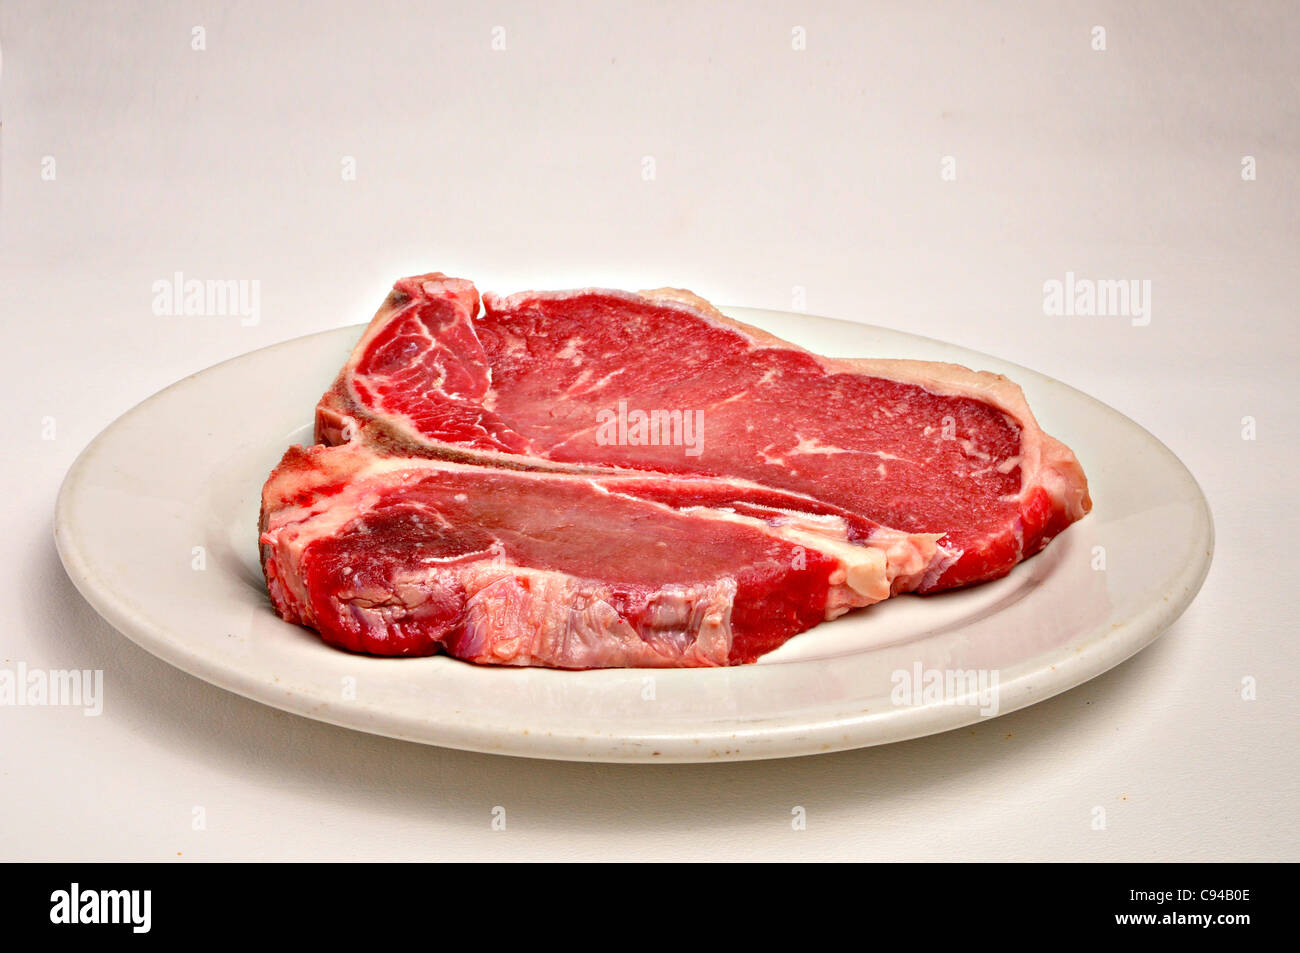 A raw uncooked t-bone steak is laying on a white plate on a plain background. Stock Photo